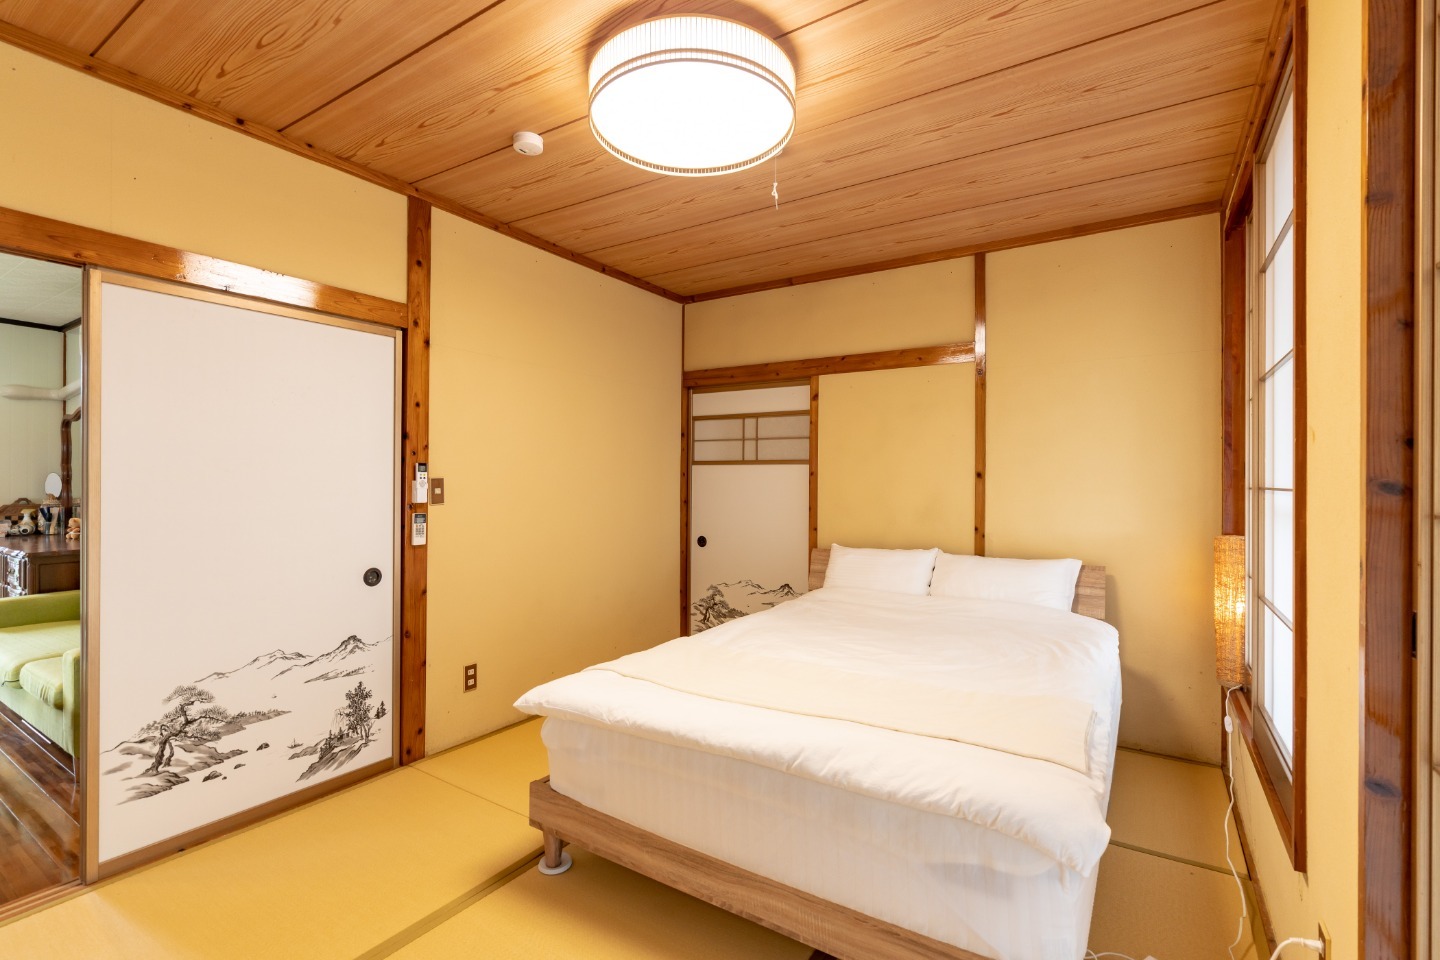 Tatami Room with Double Bed ＜ダブルベッド＞